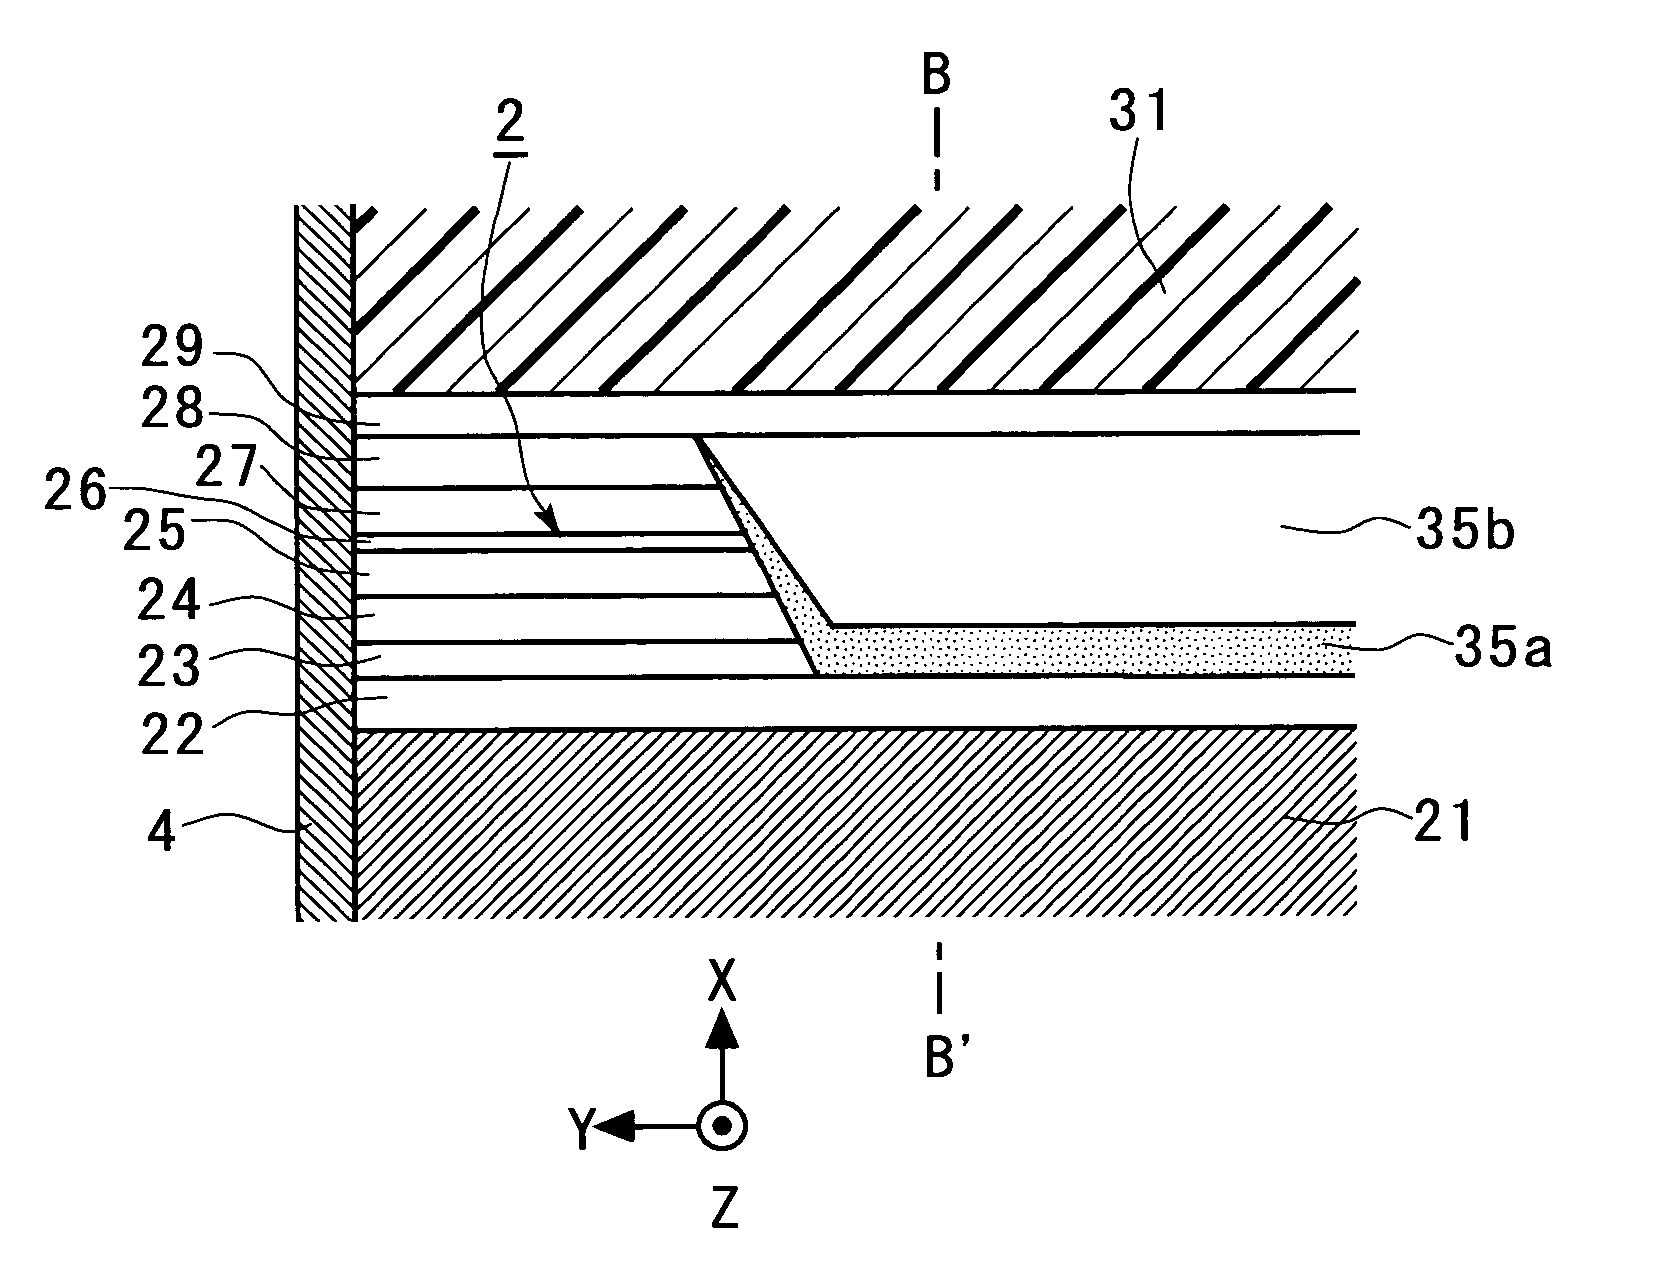 Magneto-resistive device with reduced susceptibility to ion beam damage